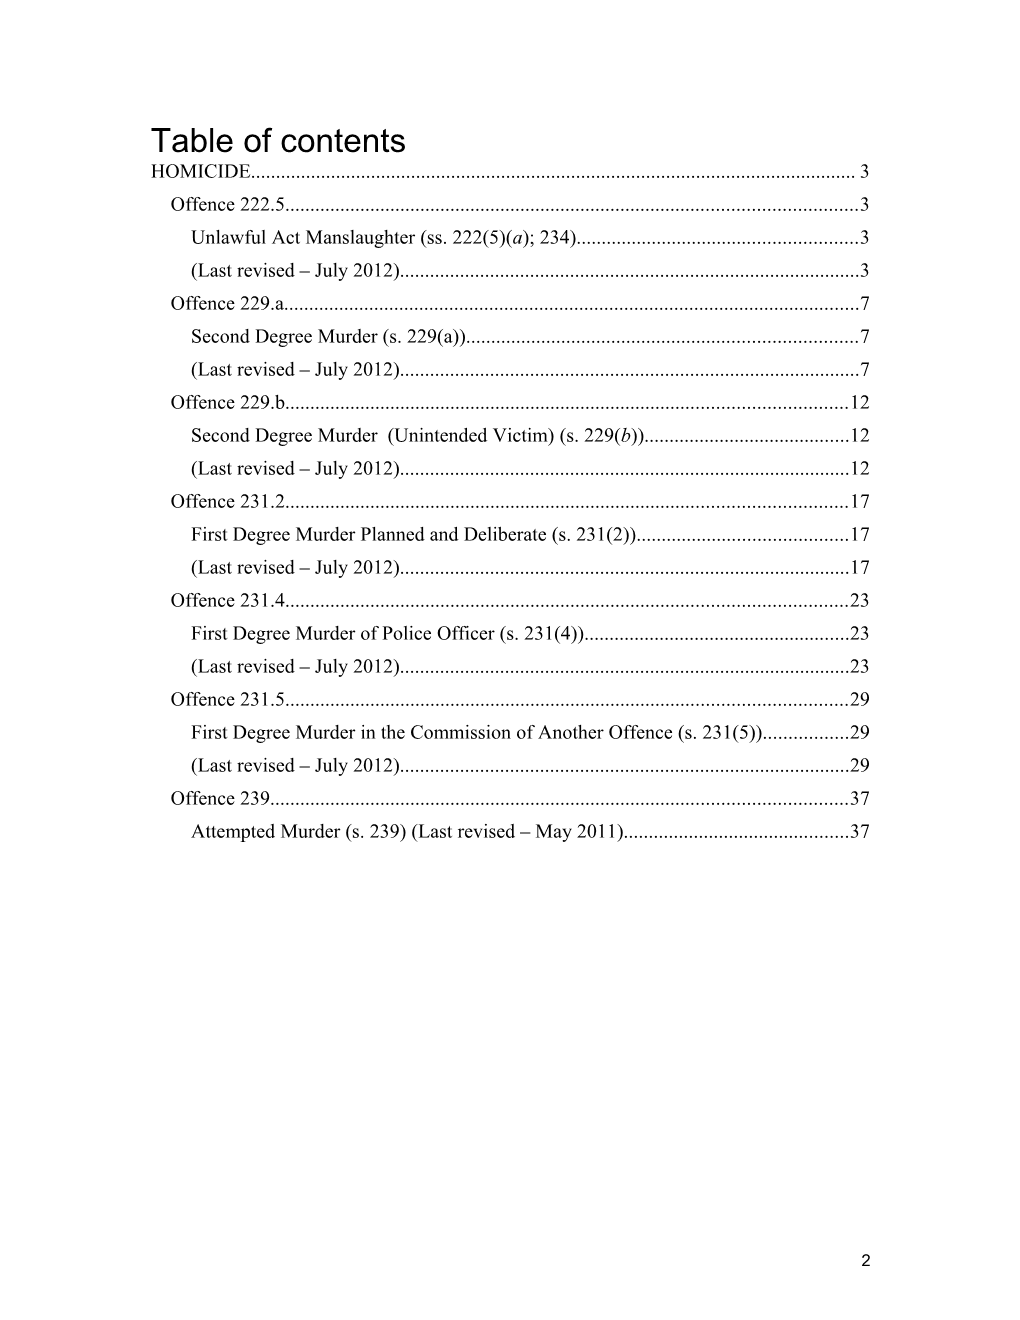 Table of Contents s345